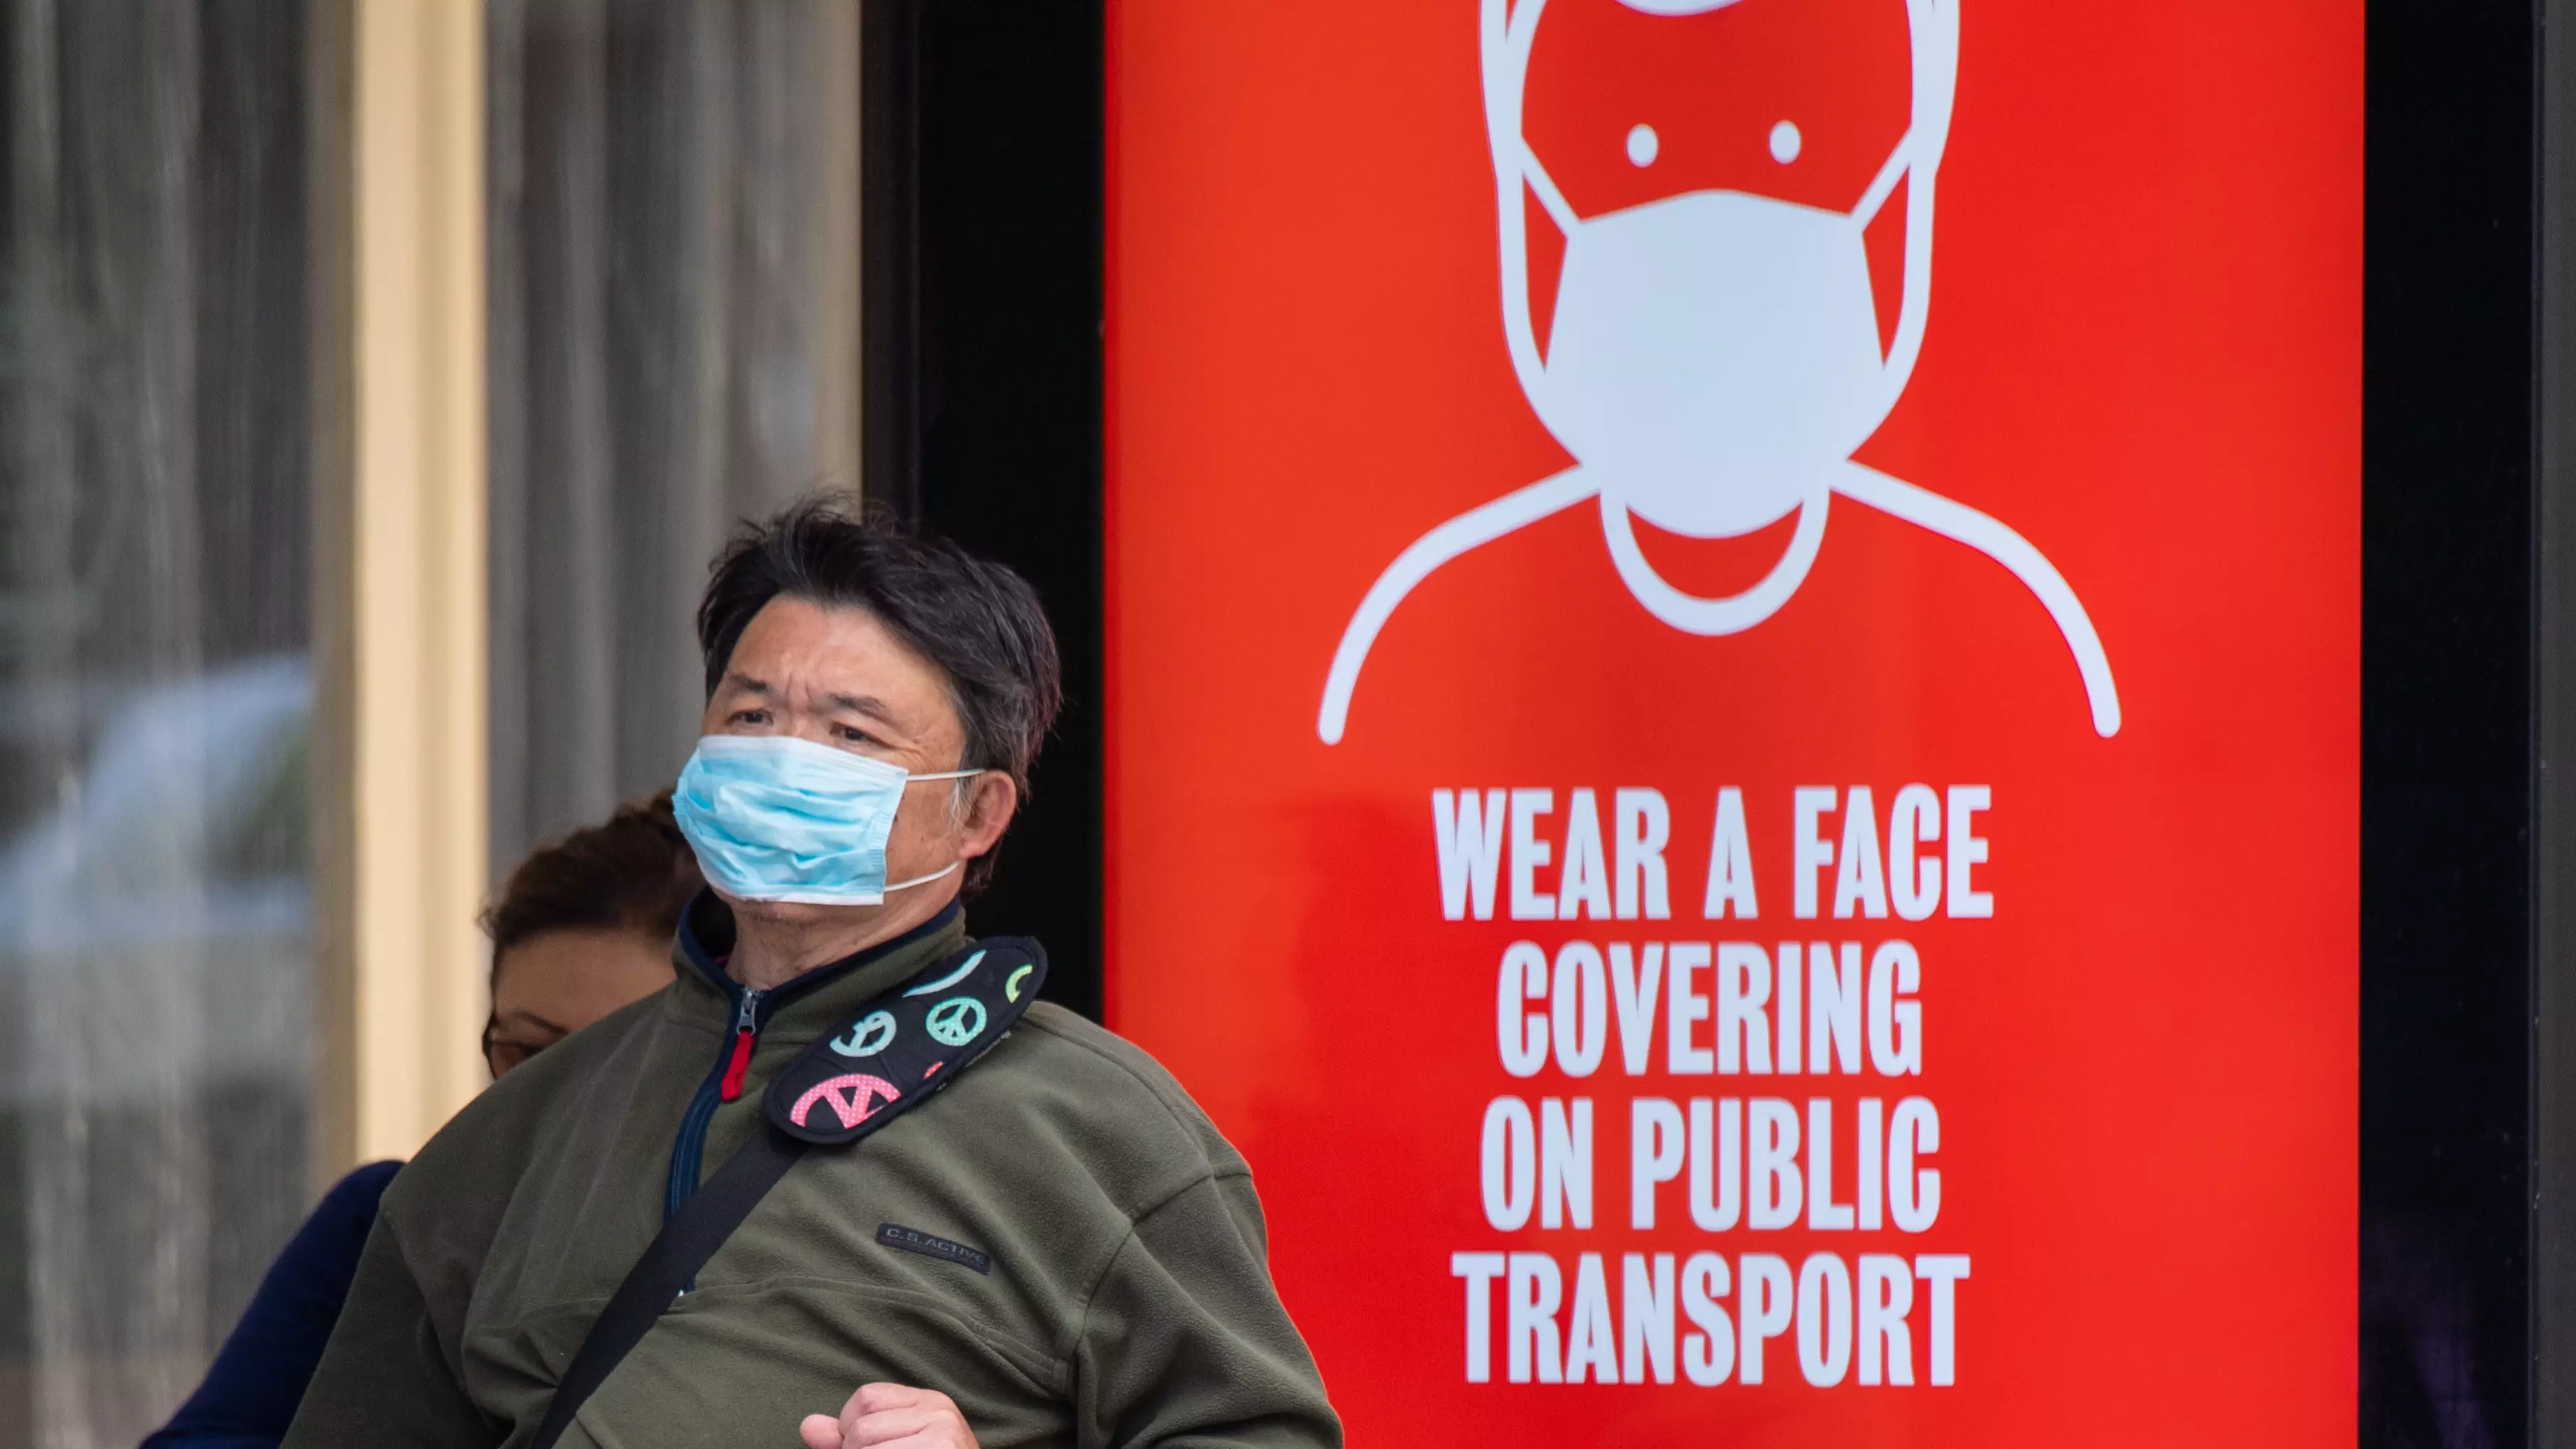 Bus Passenger Fined £1,700 For Not Wearing Mask Two Days In A Row